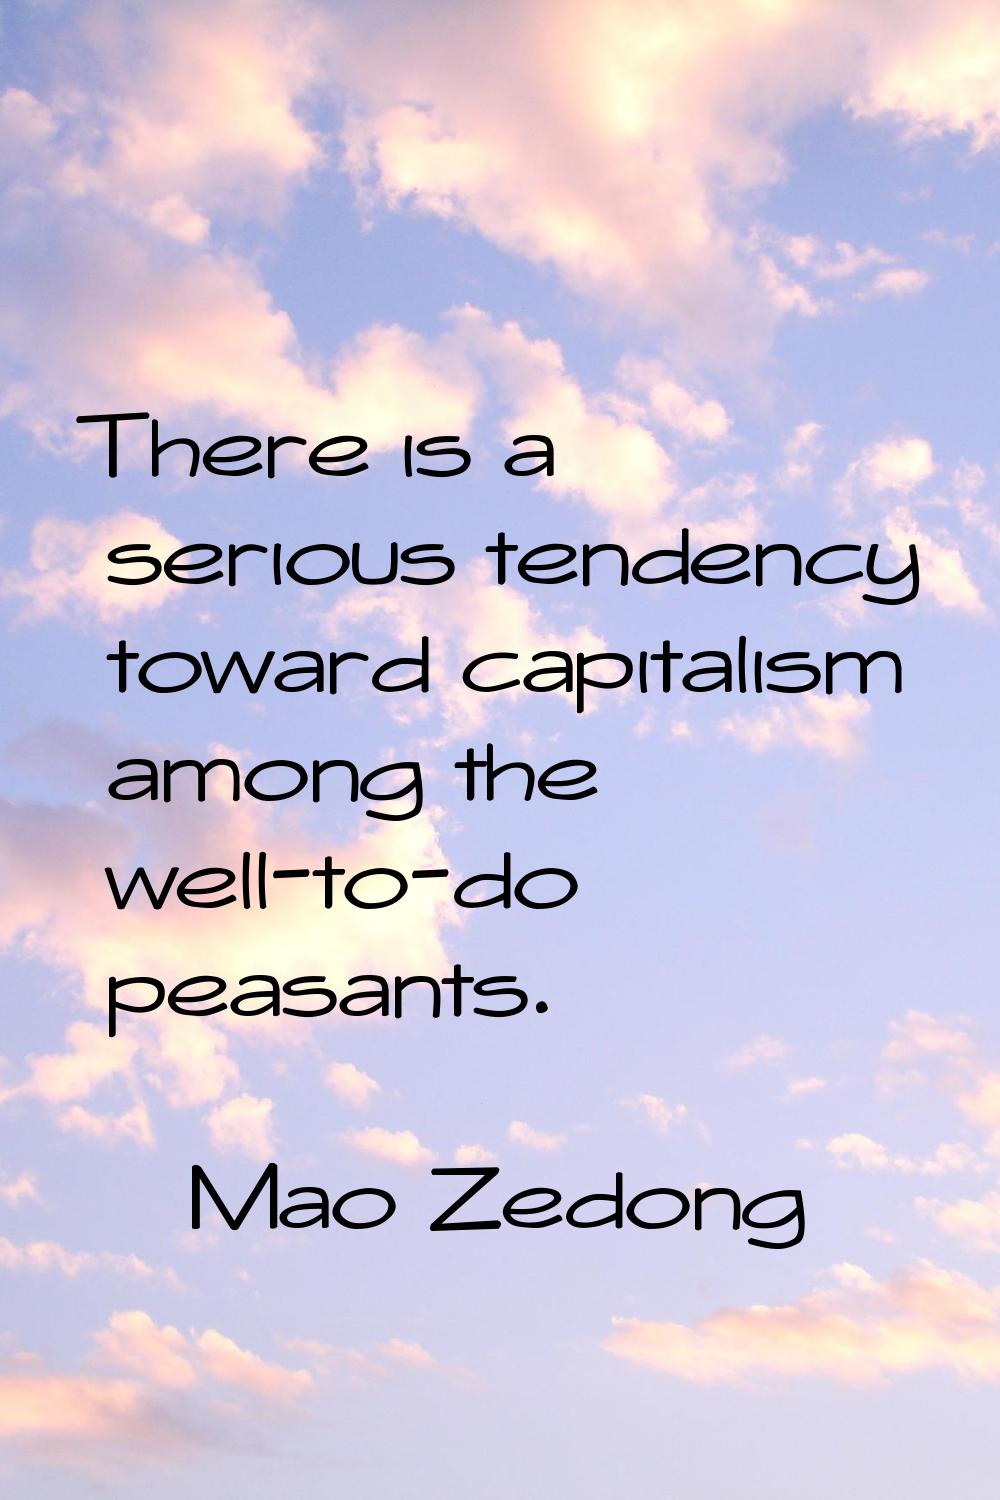 There is a serious tendency toward capitalism among the well-to-do peasants.